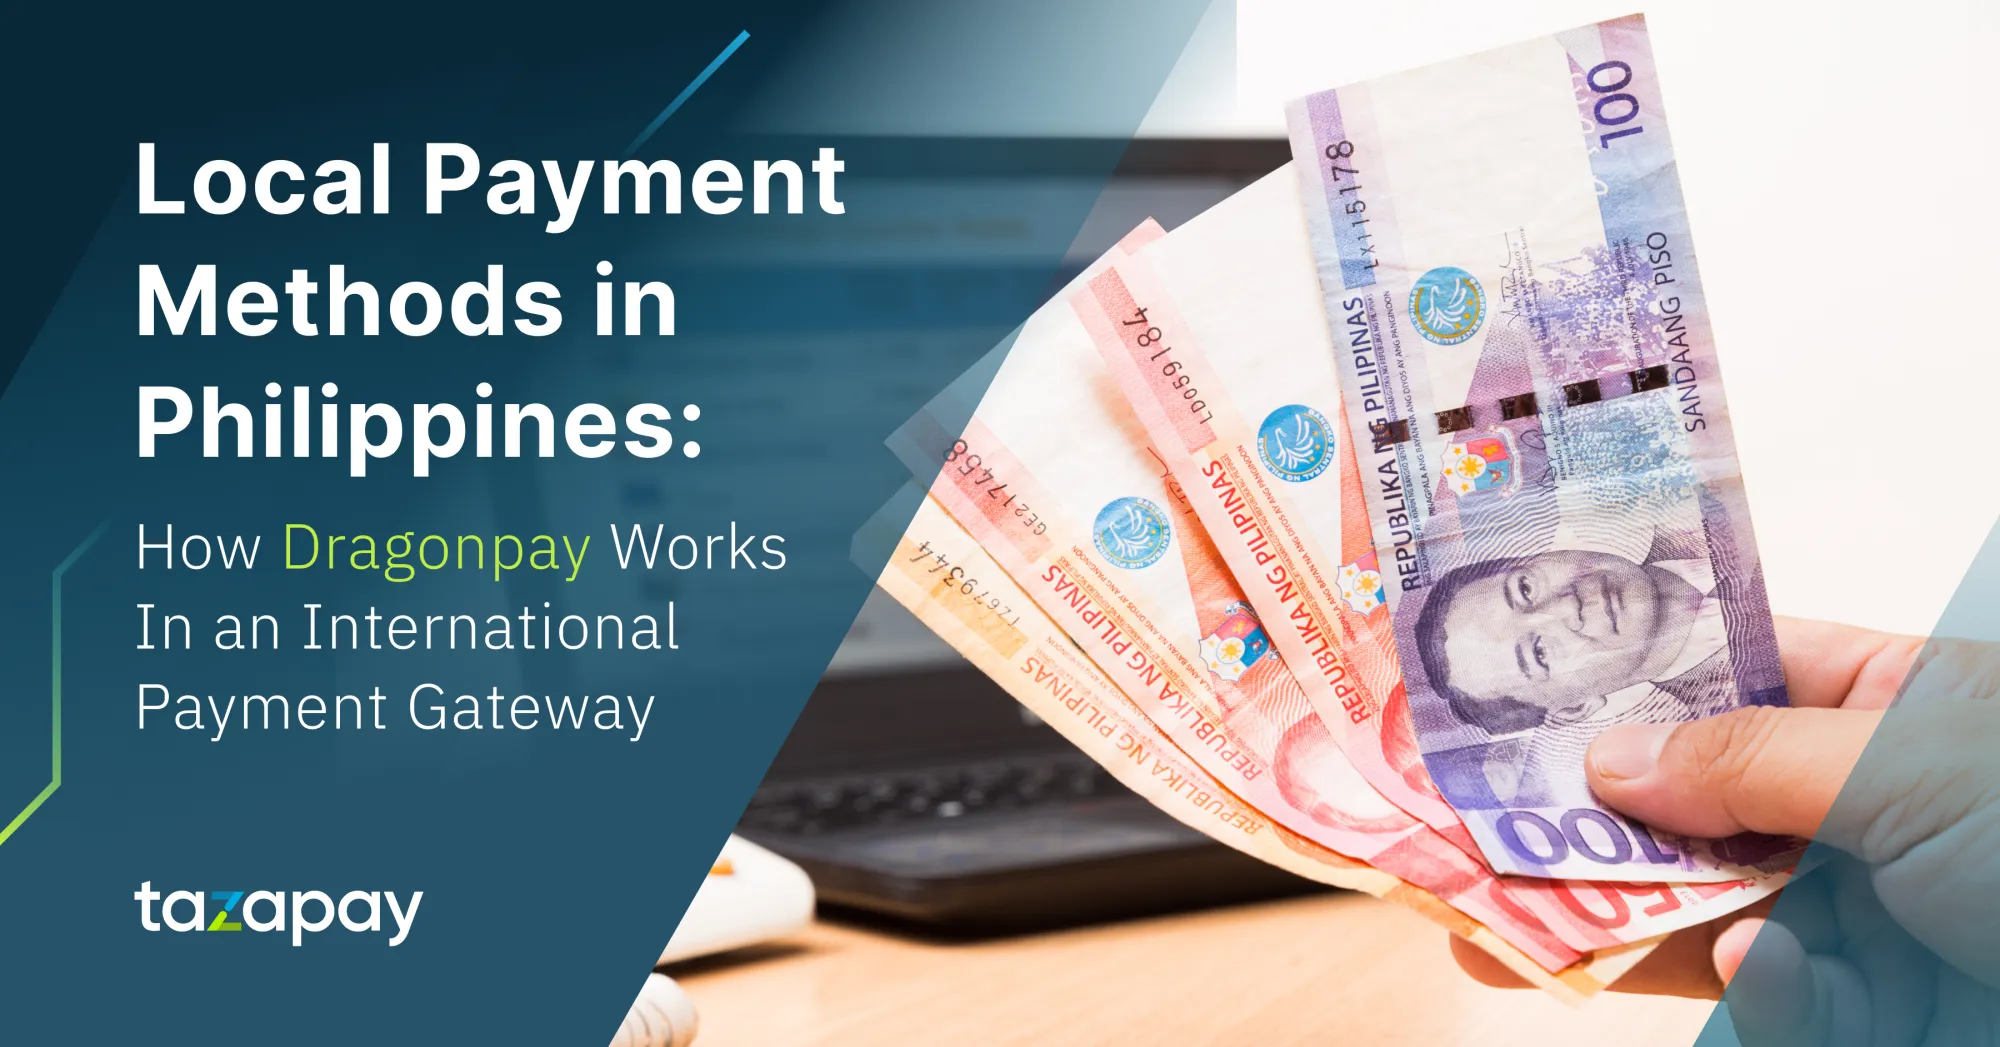 Local Payment Methods in Philippines: How Dragonpay Works In an International Payment Gateway